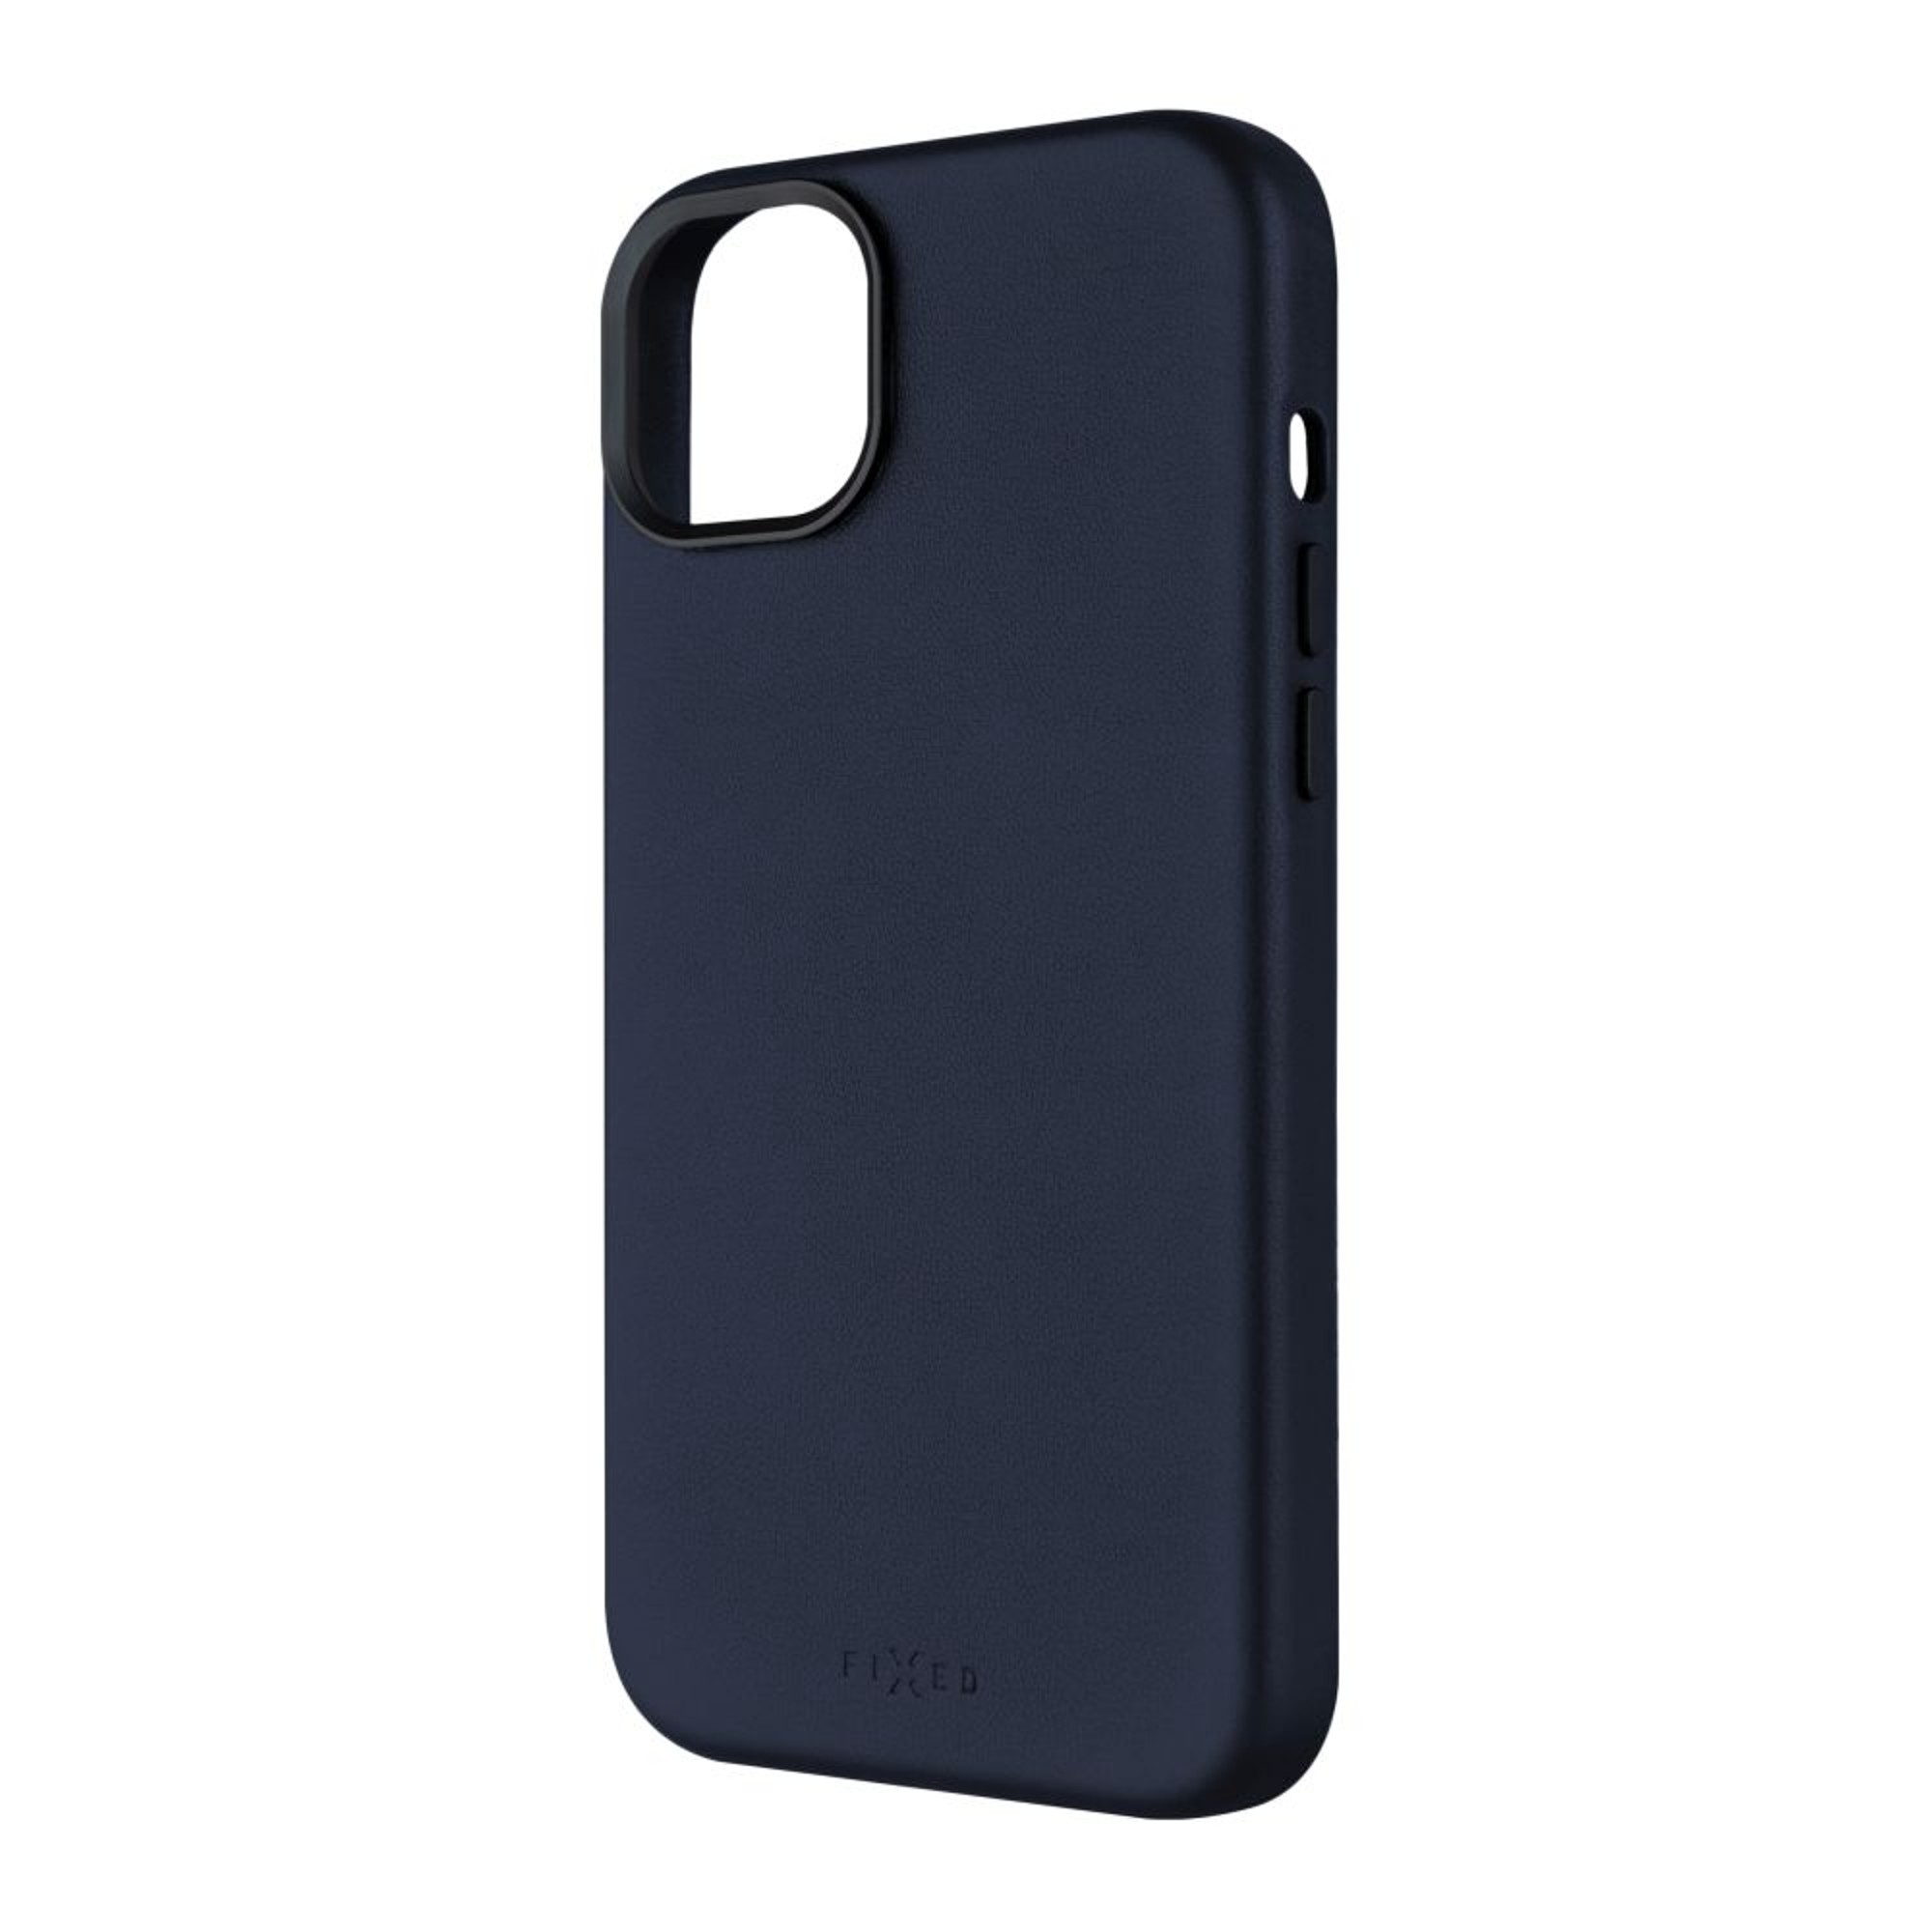 Blau Apple, FIXED 14 Backcover, iPhone FIXLM-930-BL, Pro,